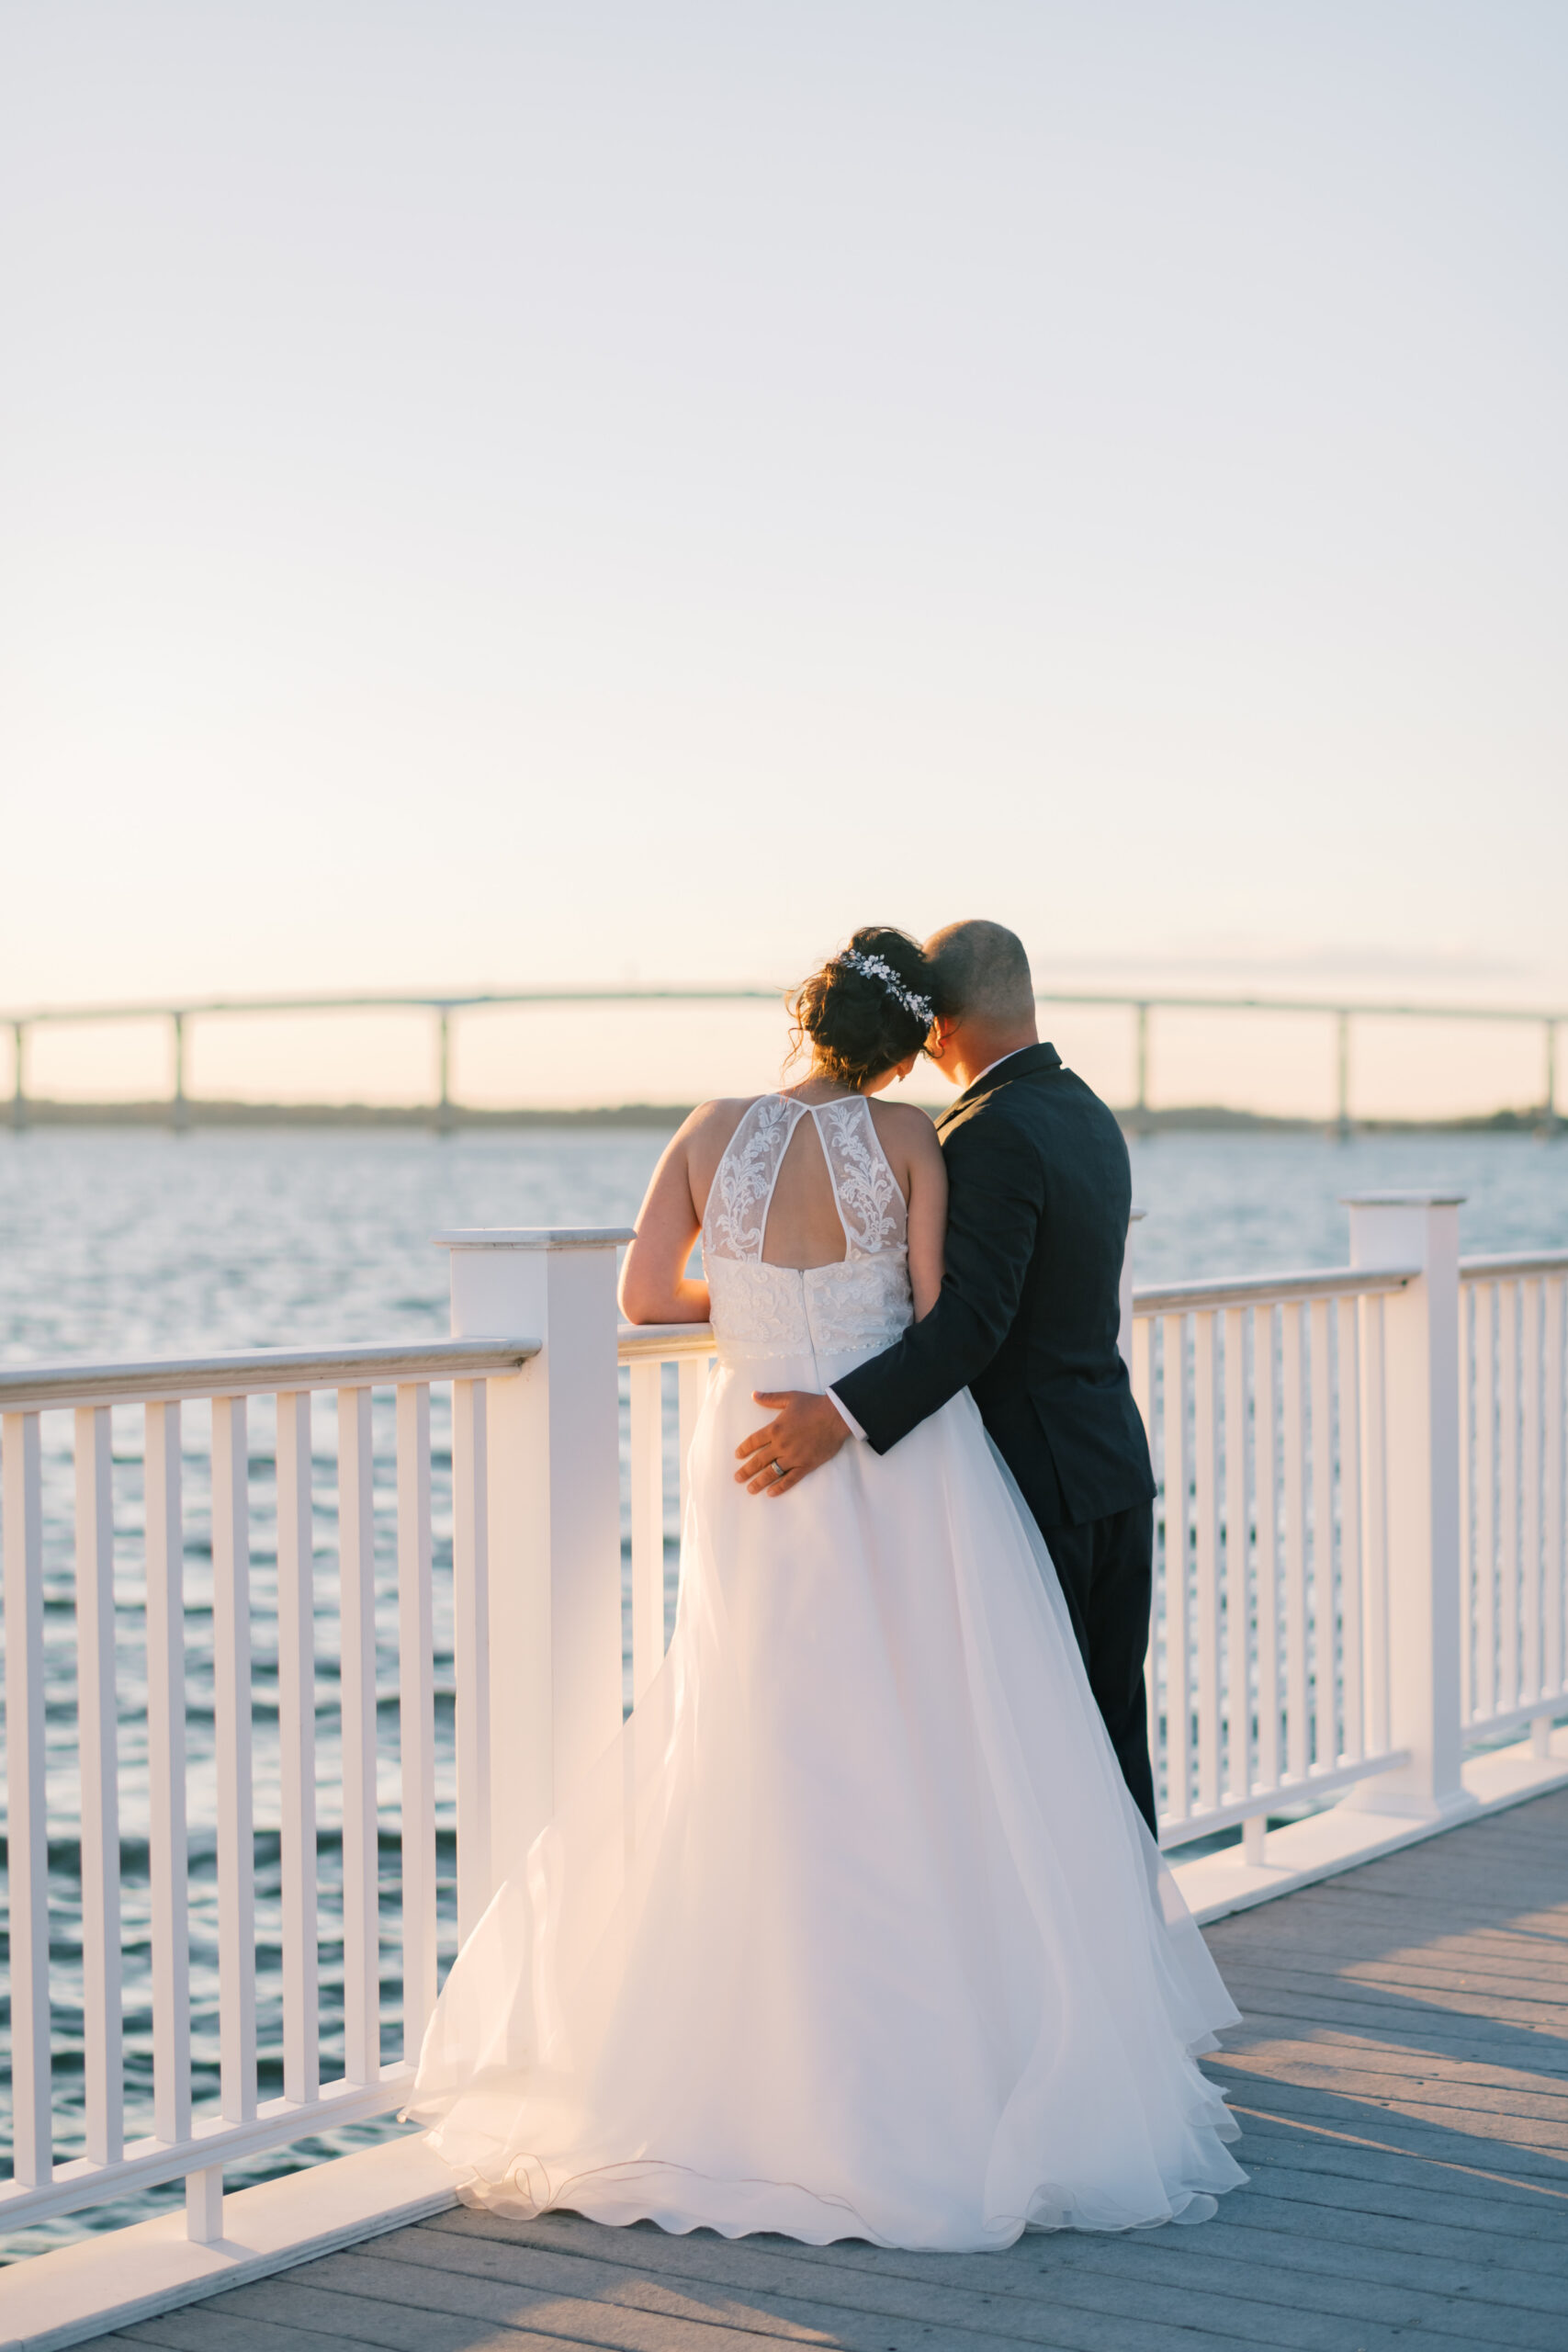 Tips for Planning Your Southern Maryland Elopement